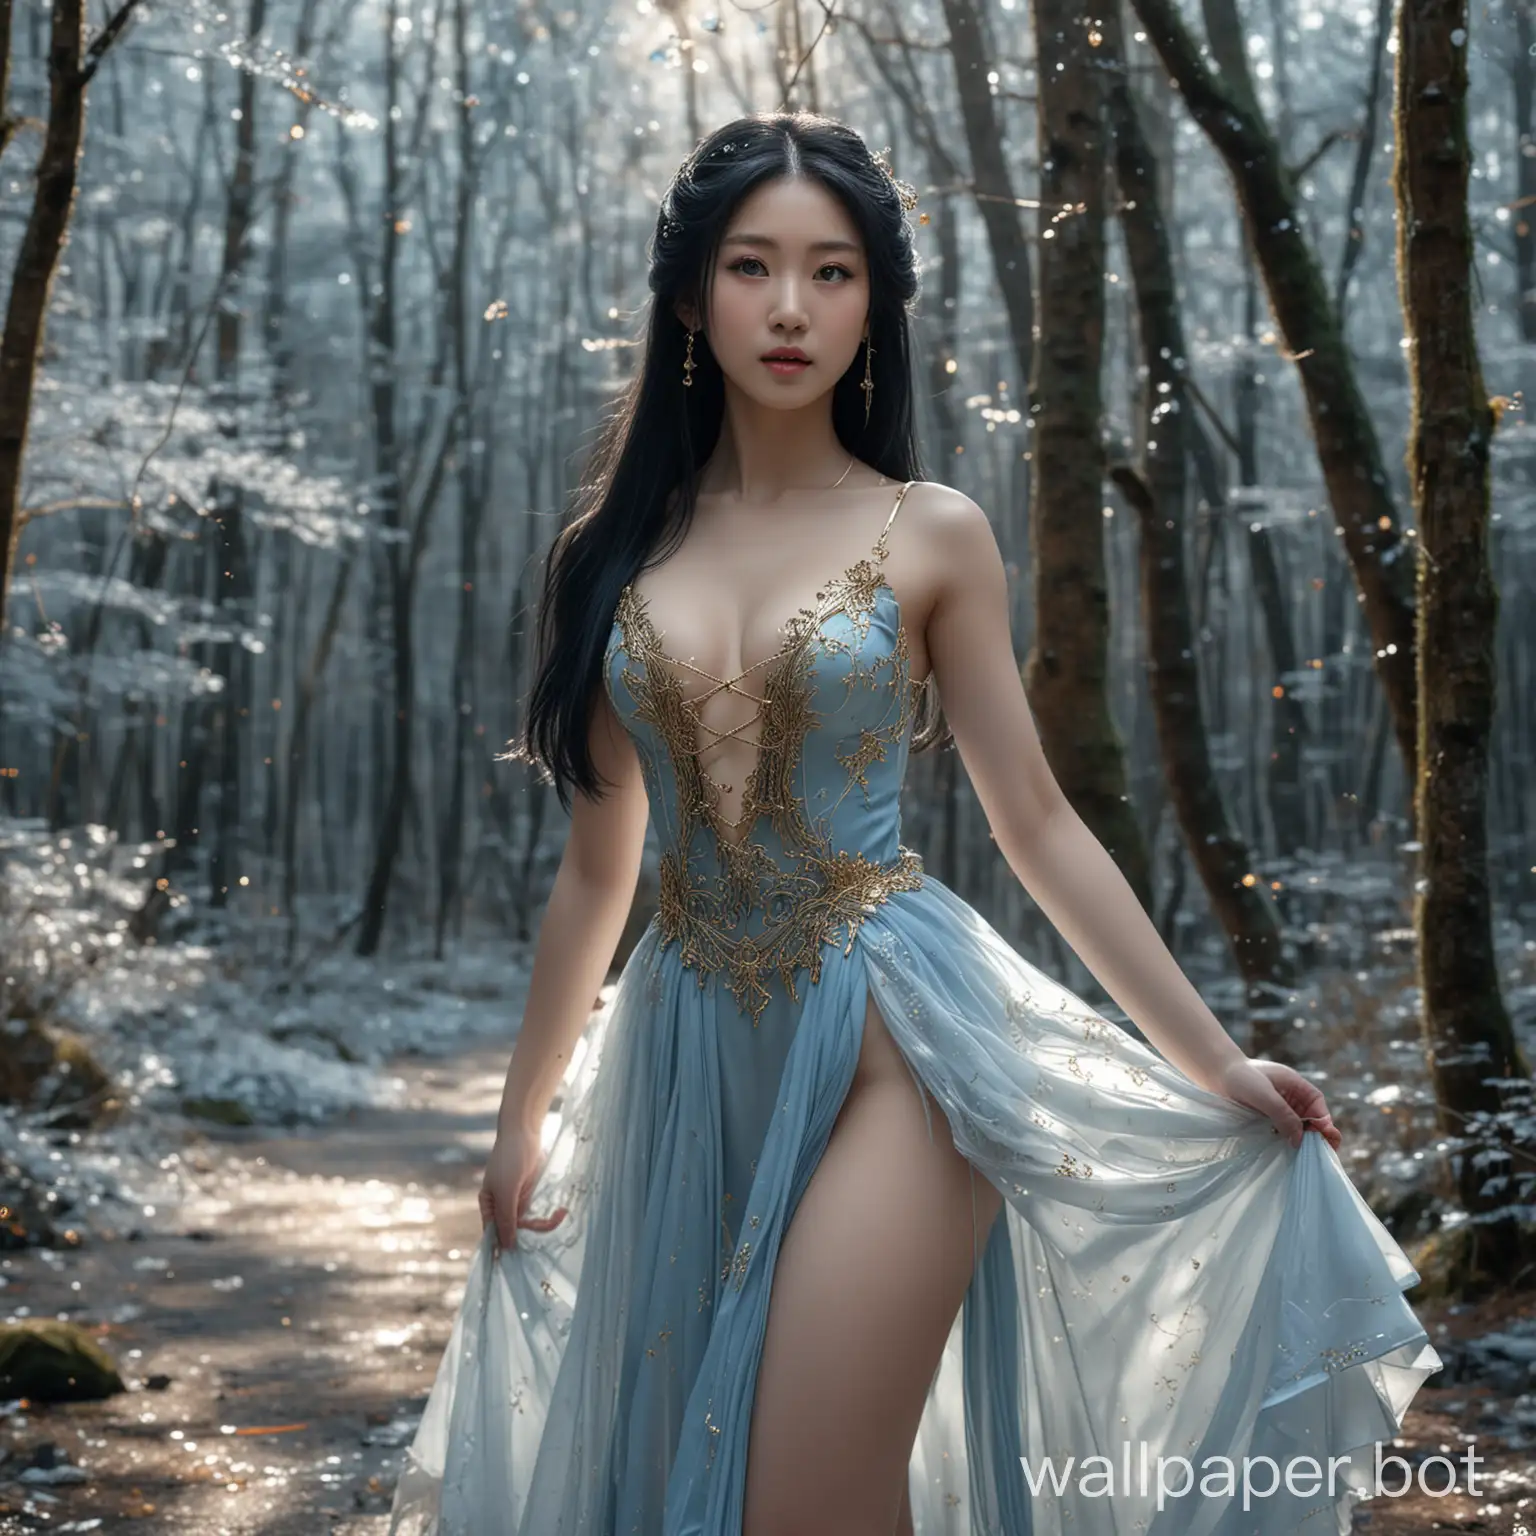 Elegant-Japanese-Ballet-Dancer-in-Icy-Forest-with-Fireflies